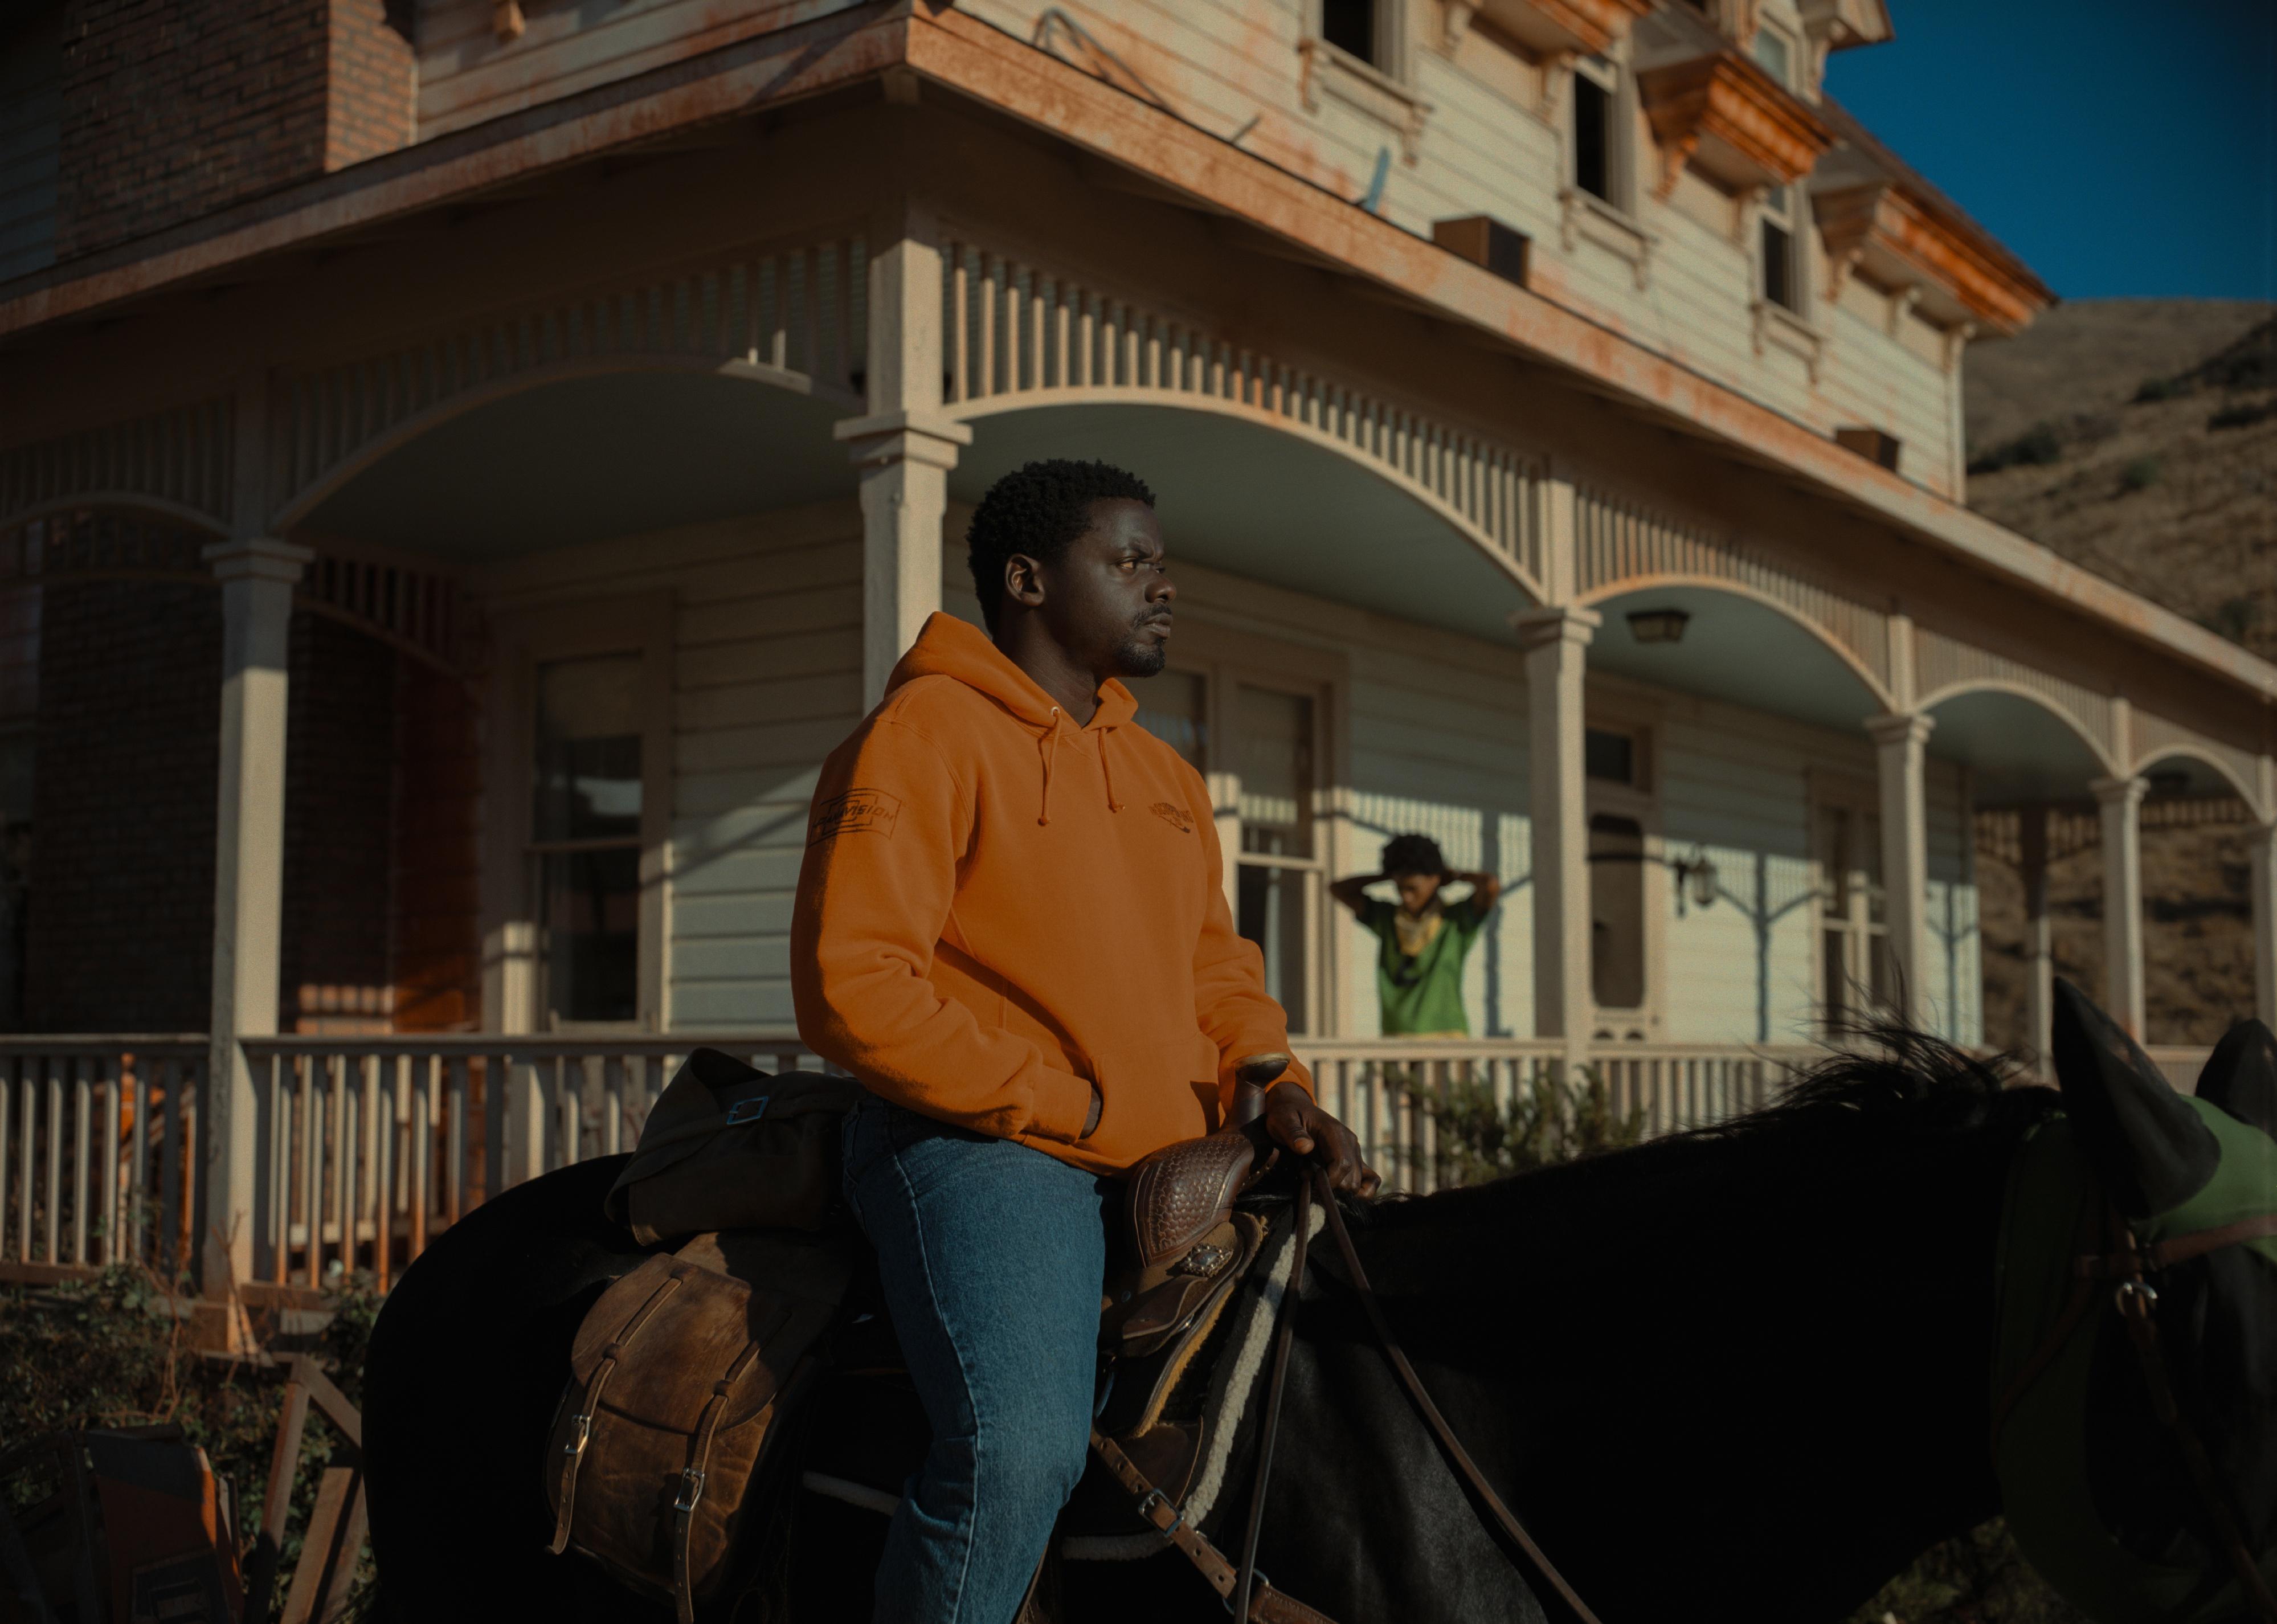 A man riding a horse in front of a large historic home with a woman on the porch.